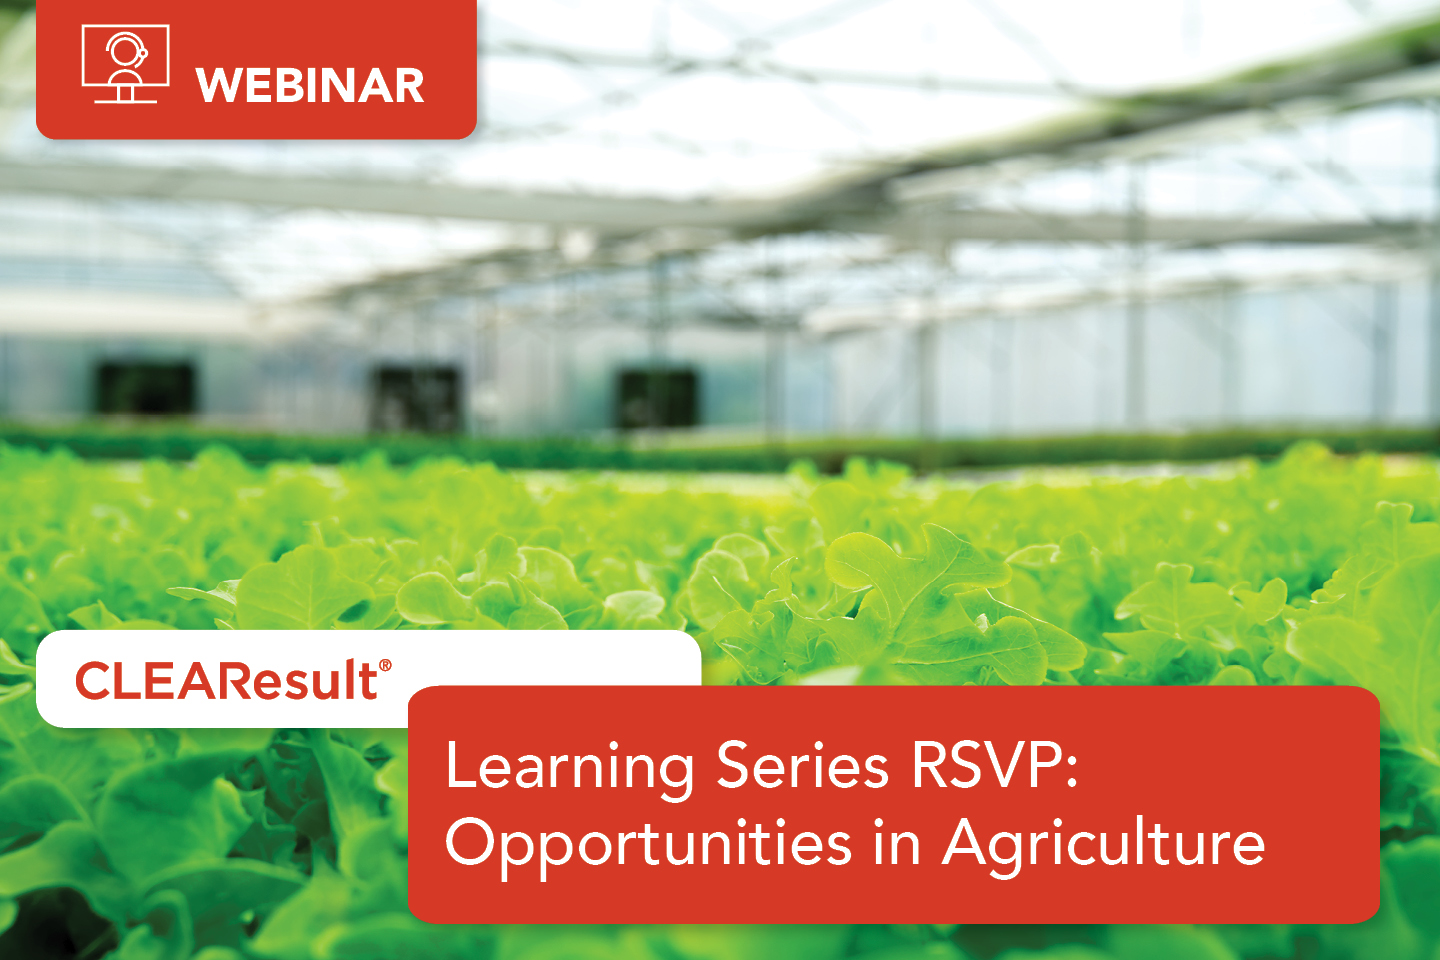 Learning Series: RSVP for Opportunities in Agriculture